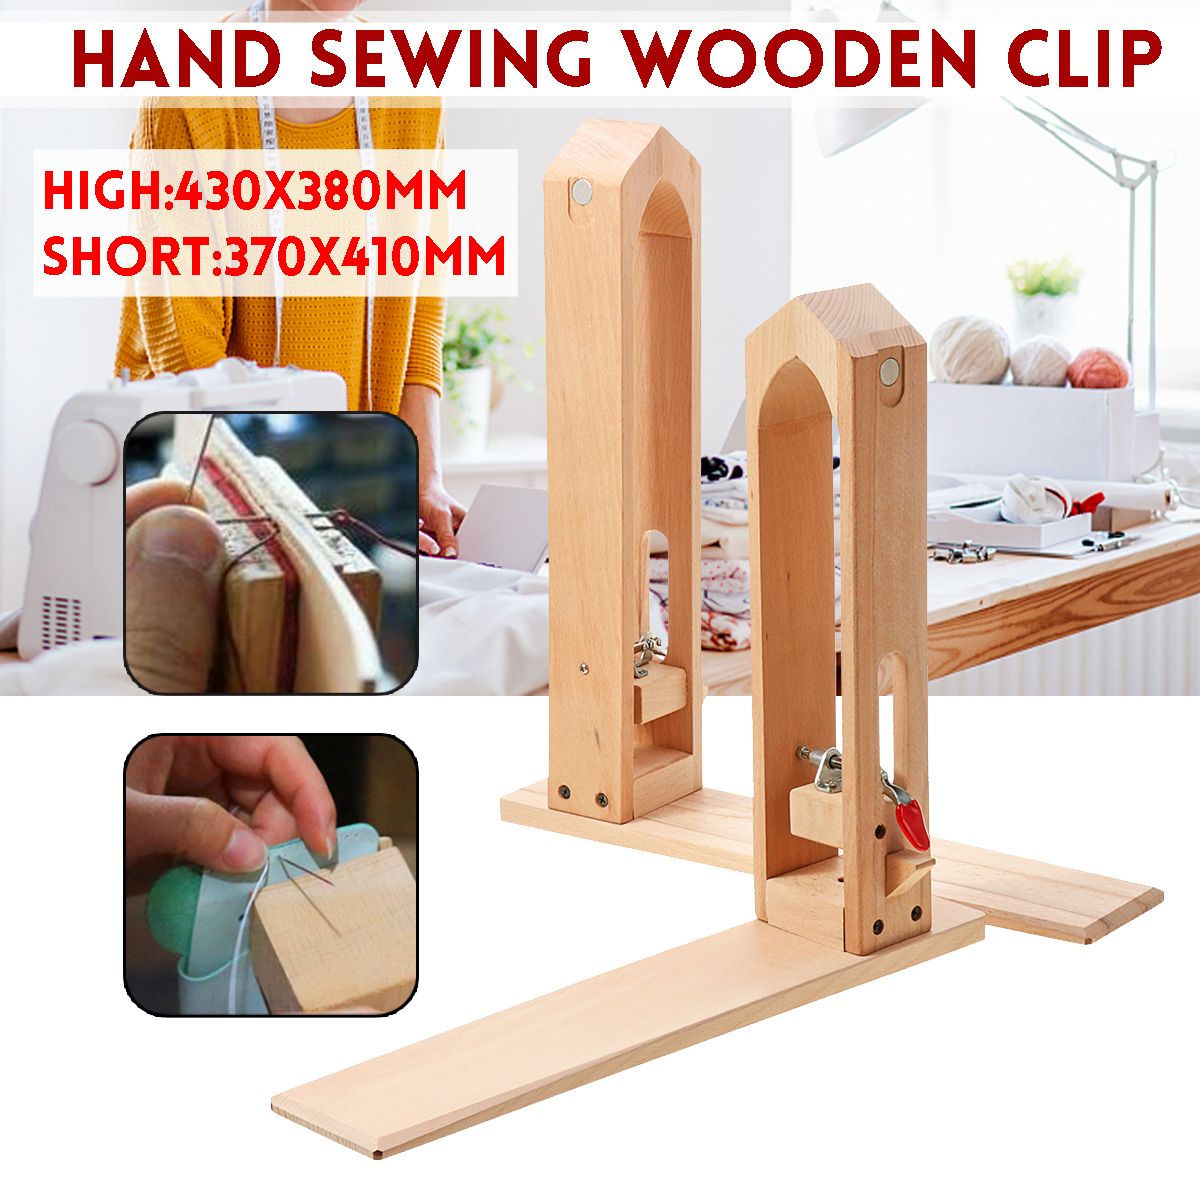 Leather-Craft-Sew-Wooden-Clip-Stitching-Hand-Adjustable-Clamp-DIY-Essential-Tool-1715170